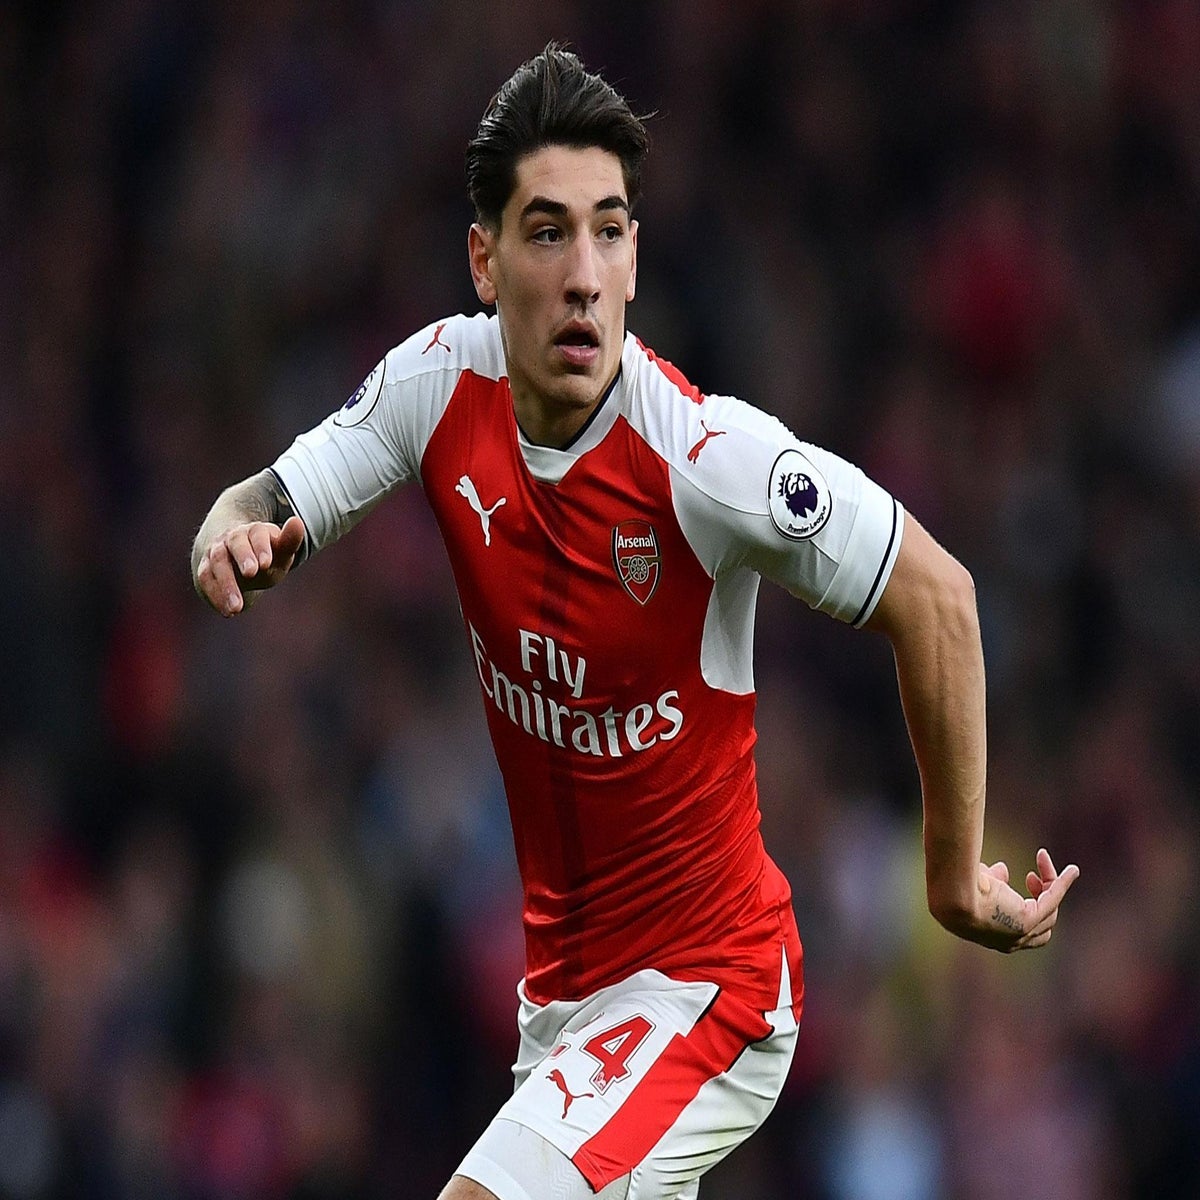 Hector Bellerin Reveals Why Arsenal Feels Like a 'New Club' Since